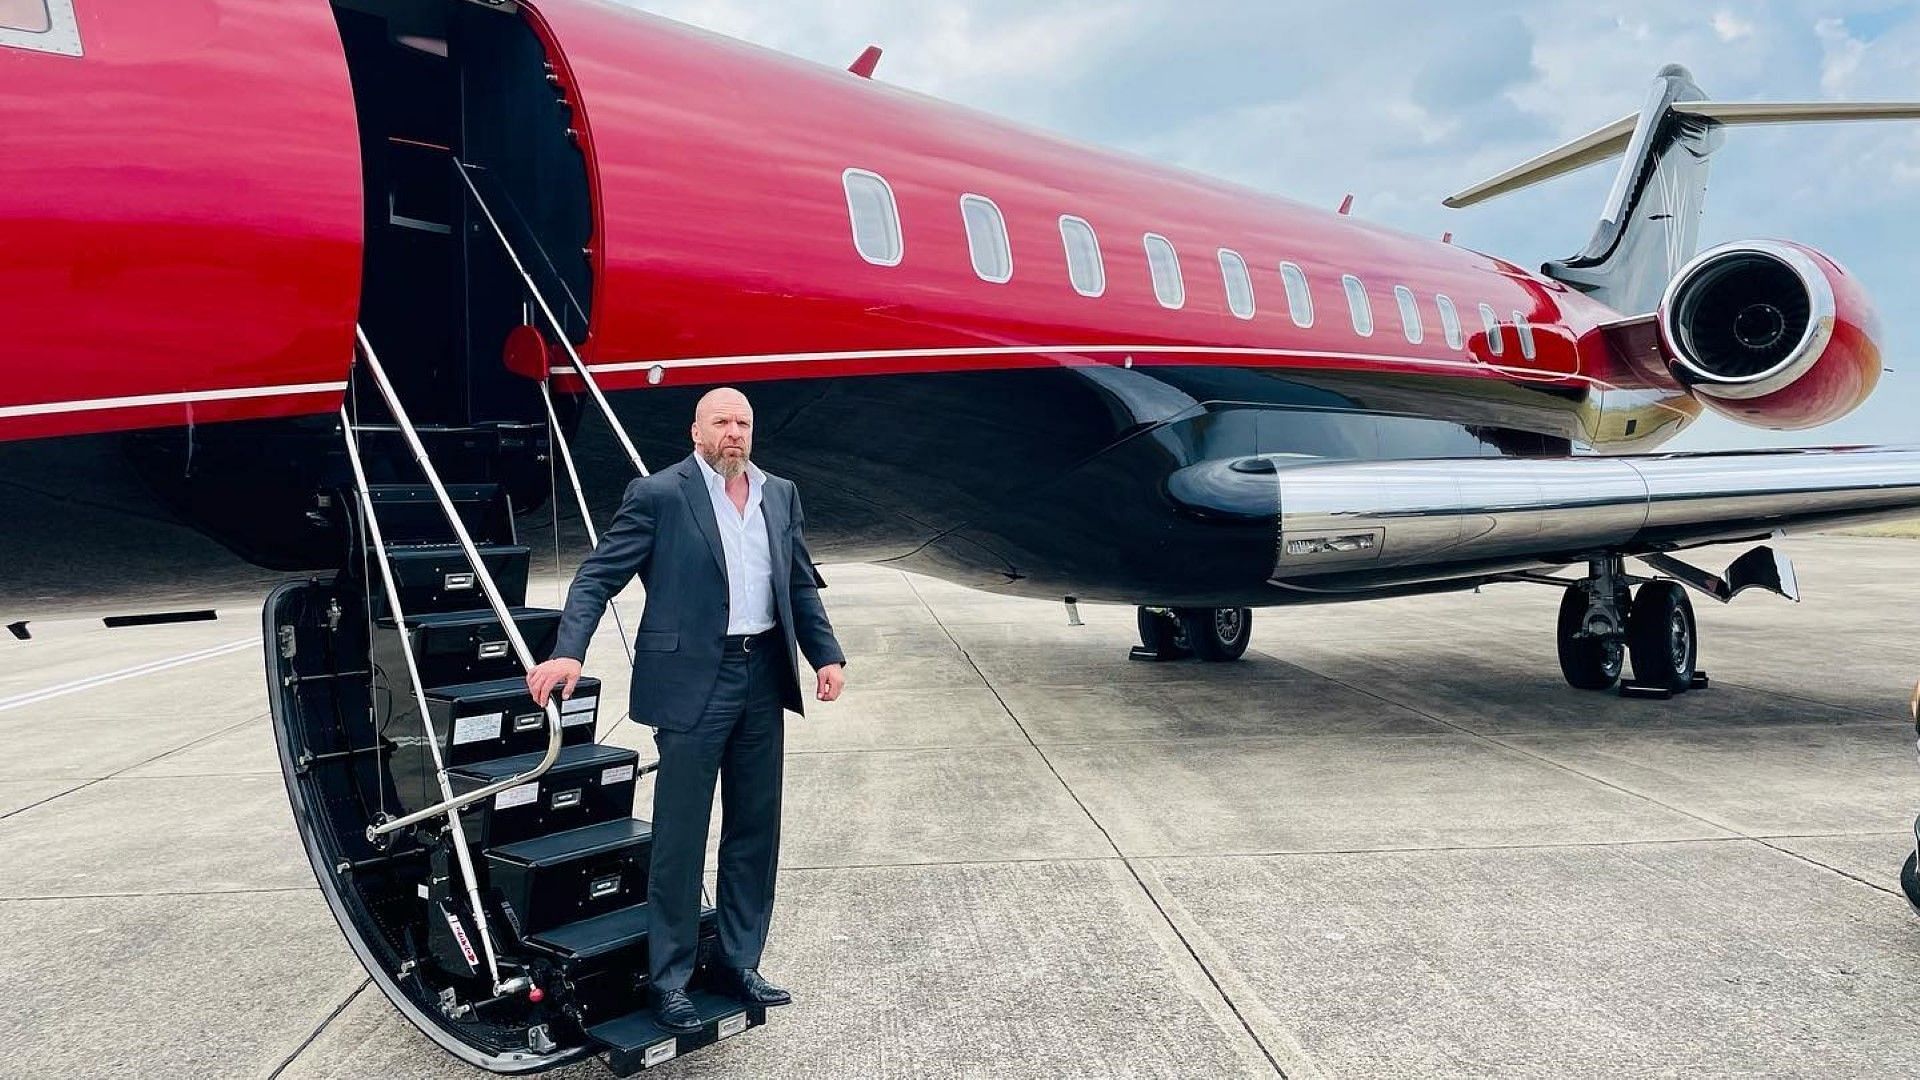 WWE Chief Content Officer Triple H steps off the company jet onto an airport runway